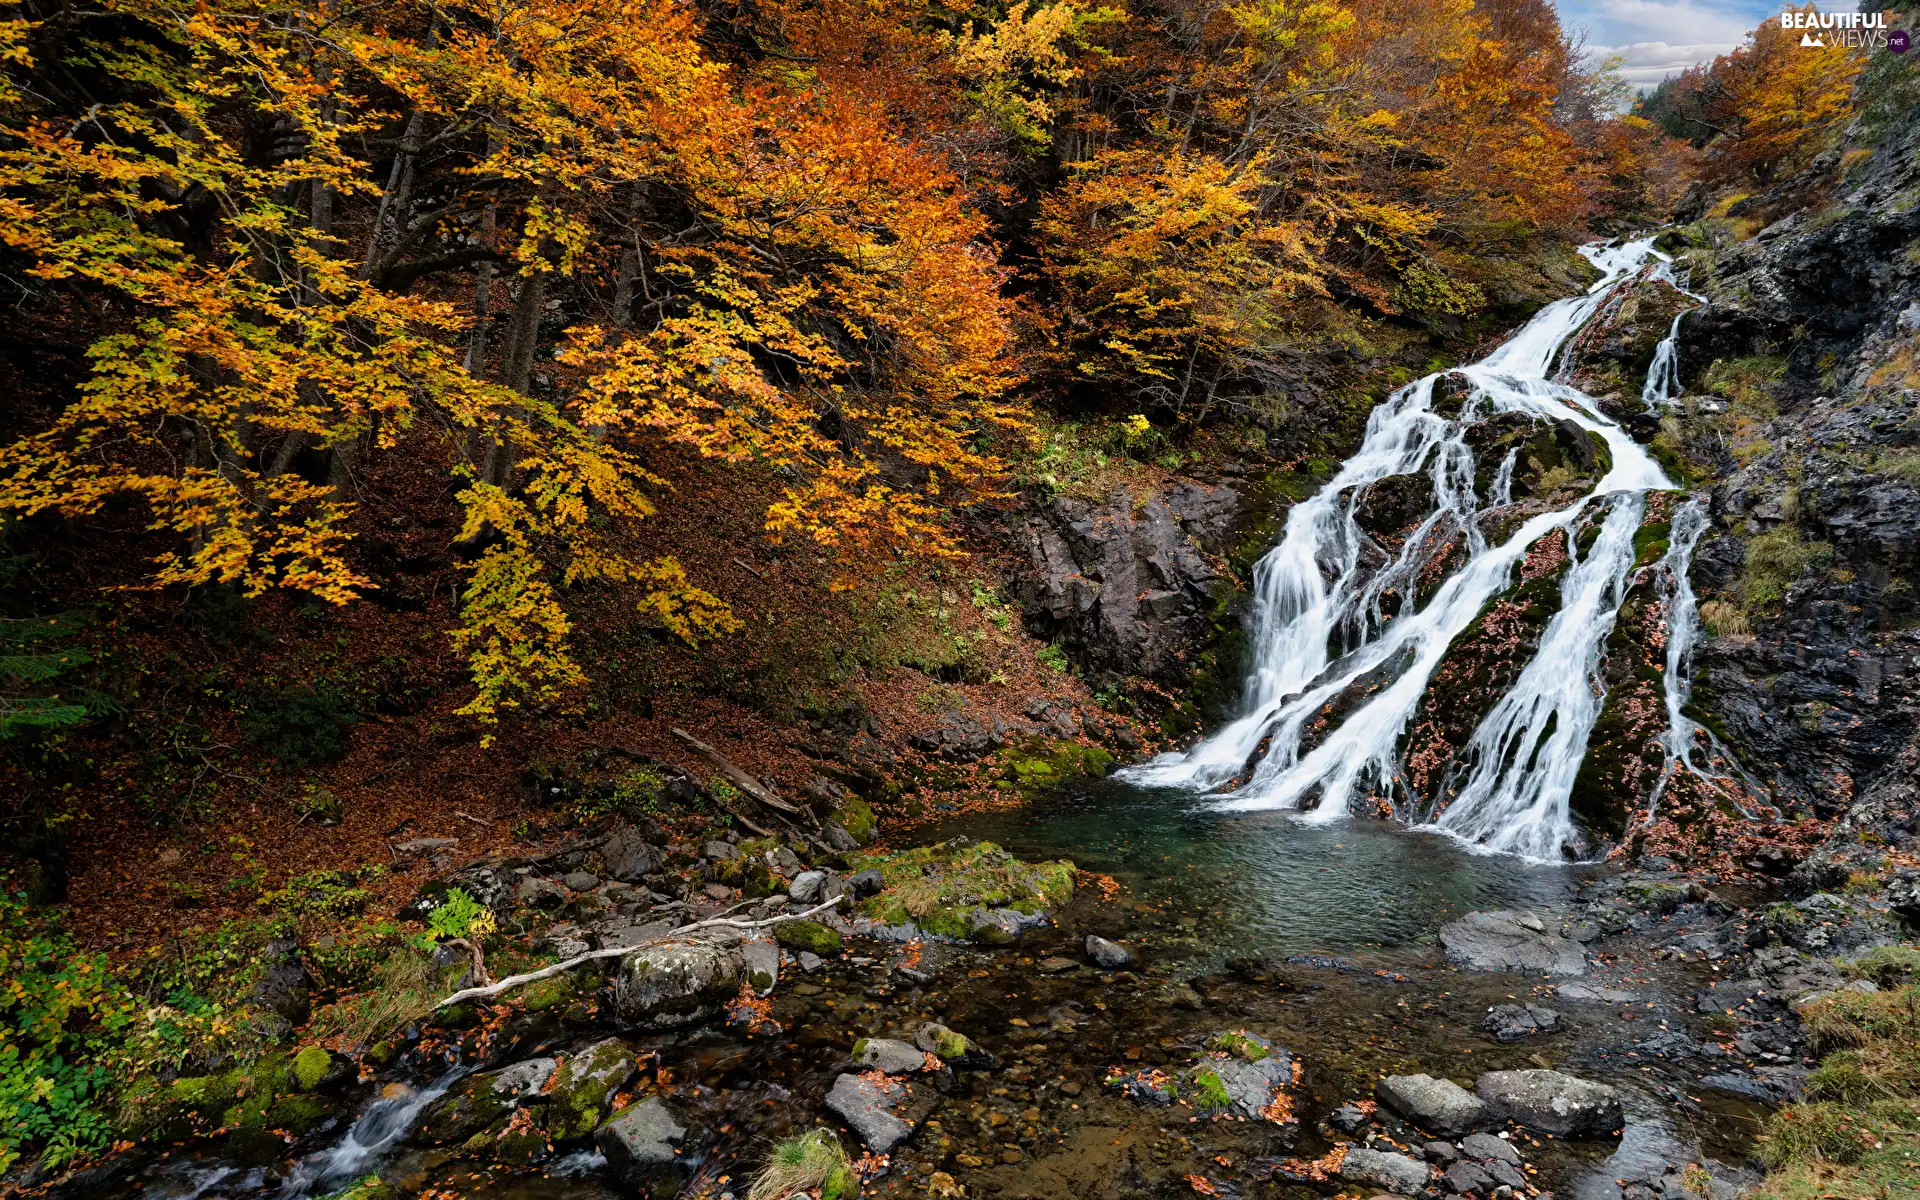 waterfall, Stones, Plants, Yellowed, viewes, River, autumn, trees